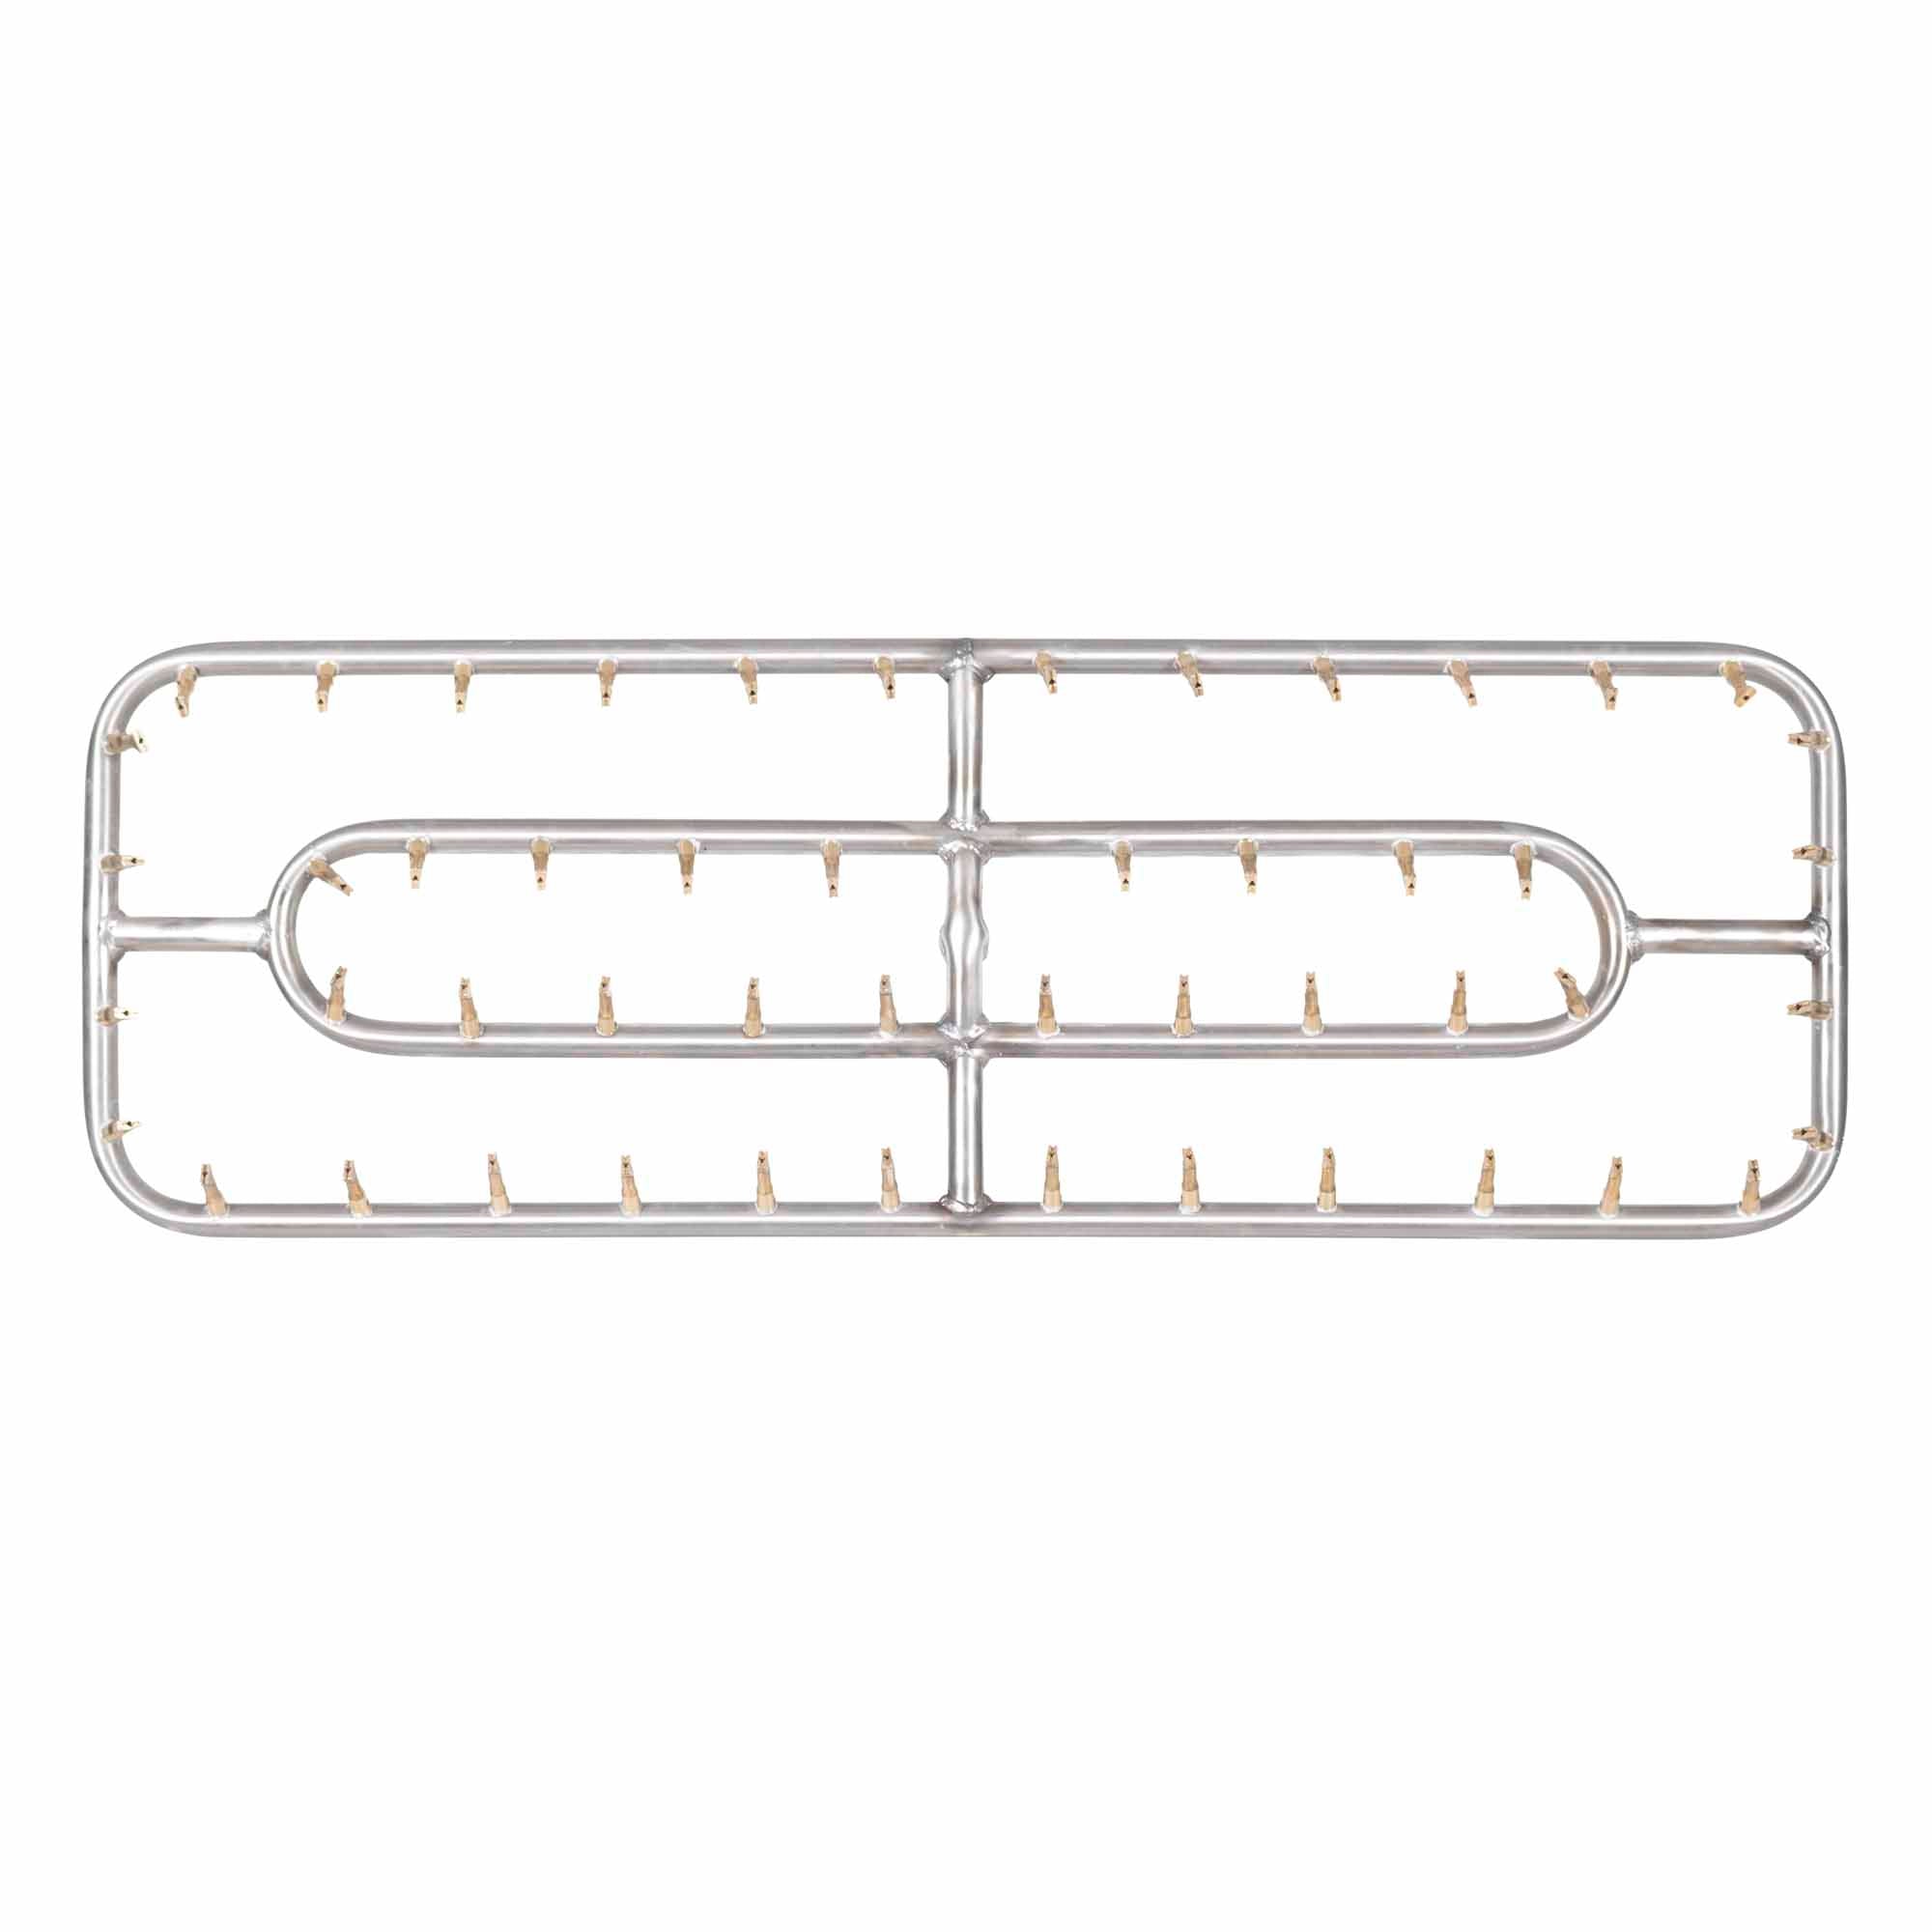 The Outdoor Plus - 48” x 12" Stainless Steel Double Rectangle Bullet Burner - OPT-BDRTSS4812